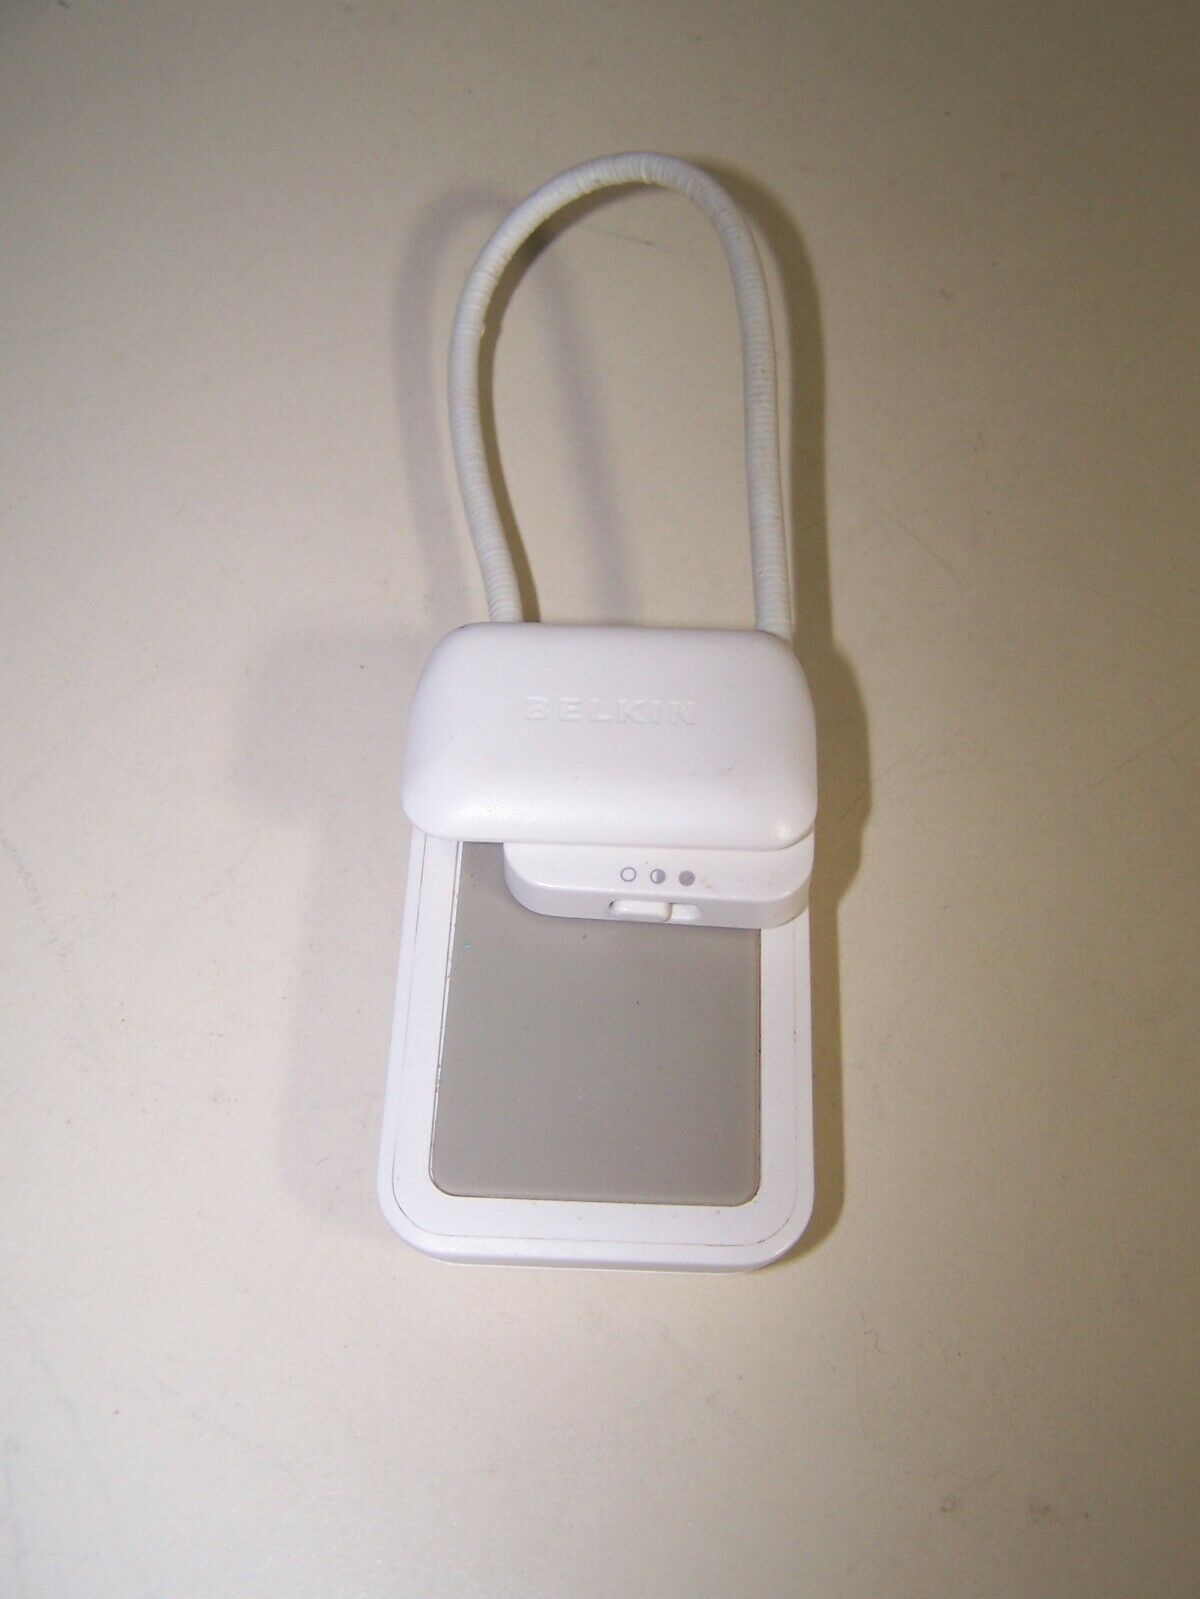 Belkin Kindle Booklight F5l073 White With Batteries Adjustable Thickness Clamp